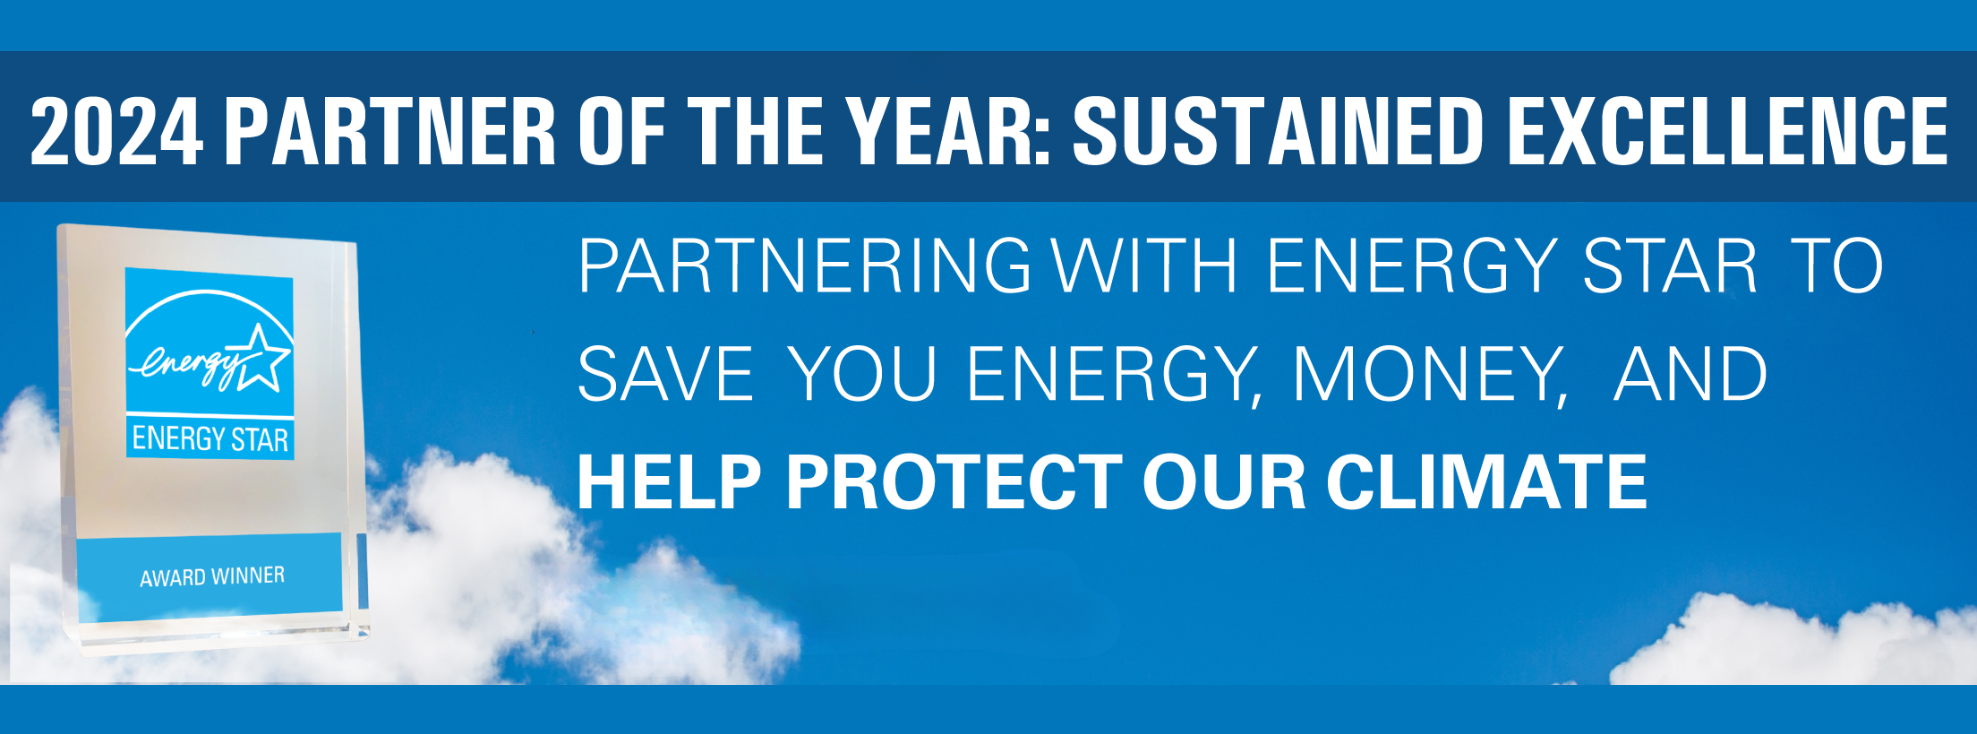 Energy Star Partner of the Year 2024 